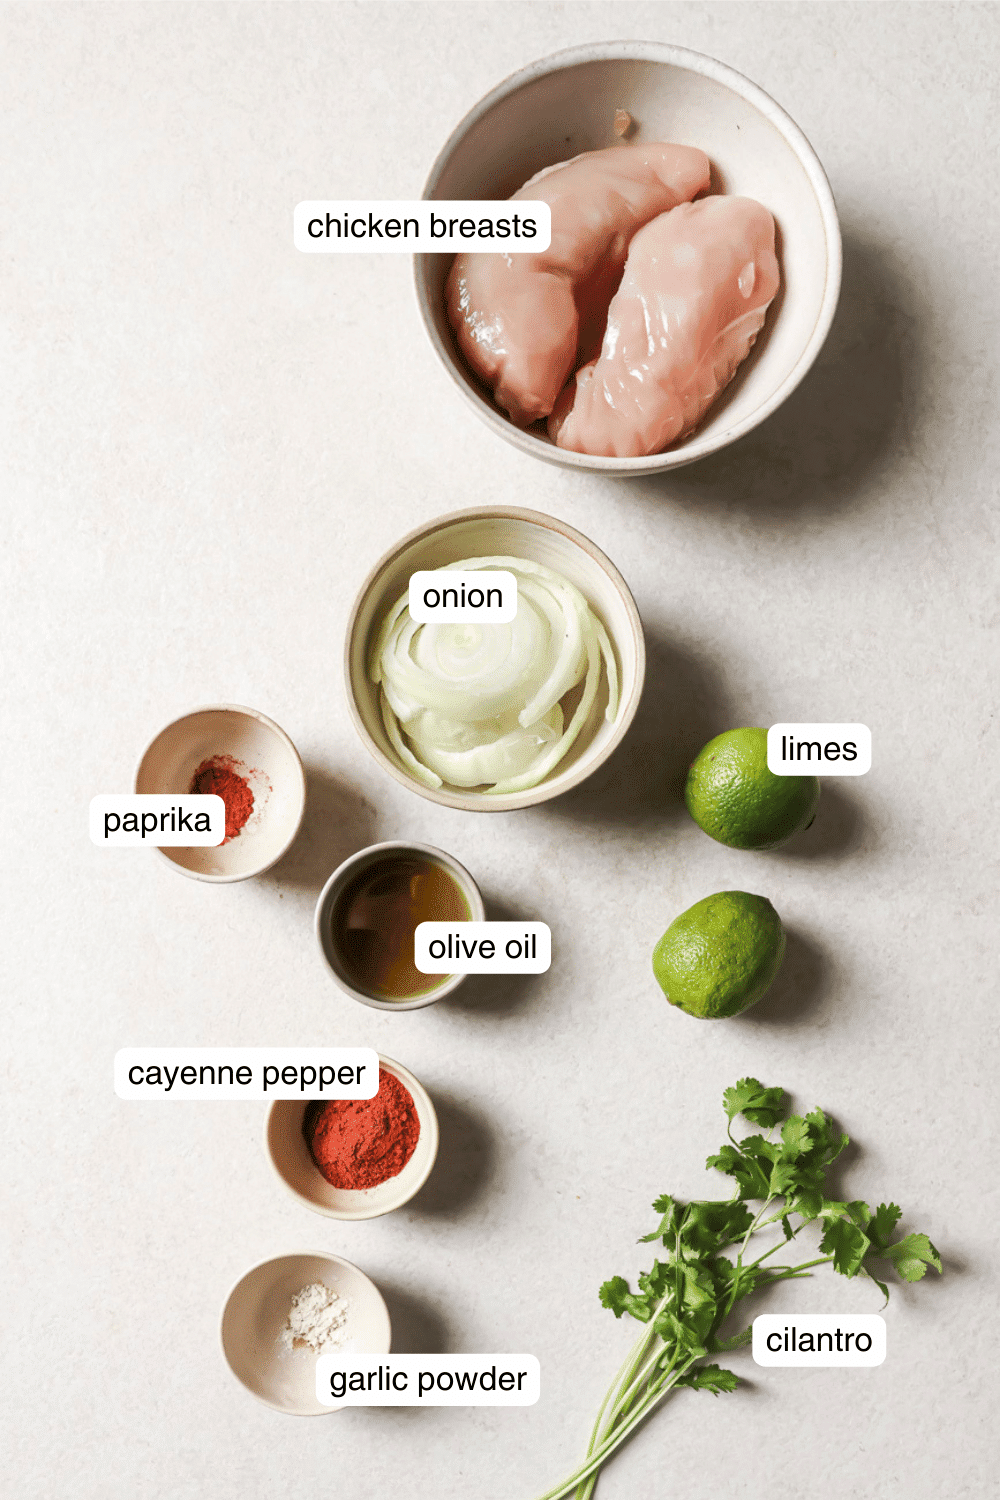 Labeled ingredients for chili lime chicken